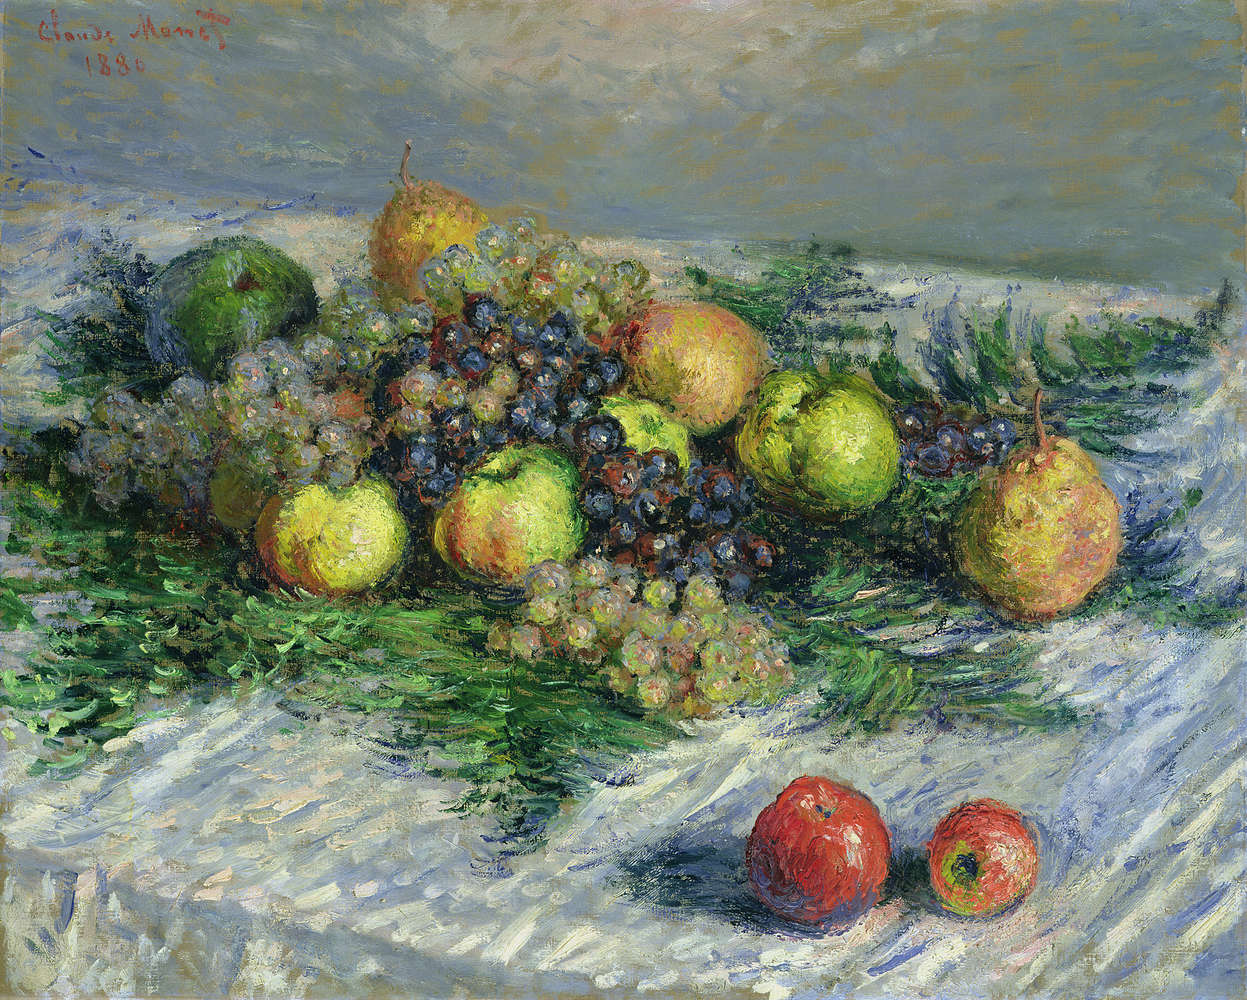             Photo wallpaper "Still life with pears and grapes" by Claude Monet
        